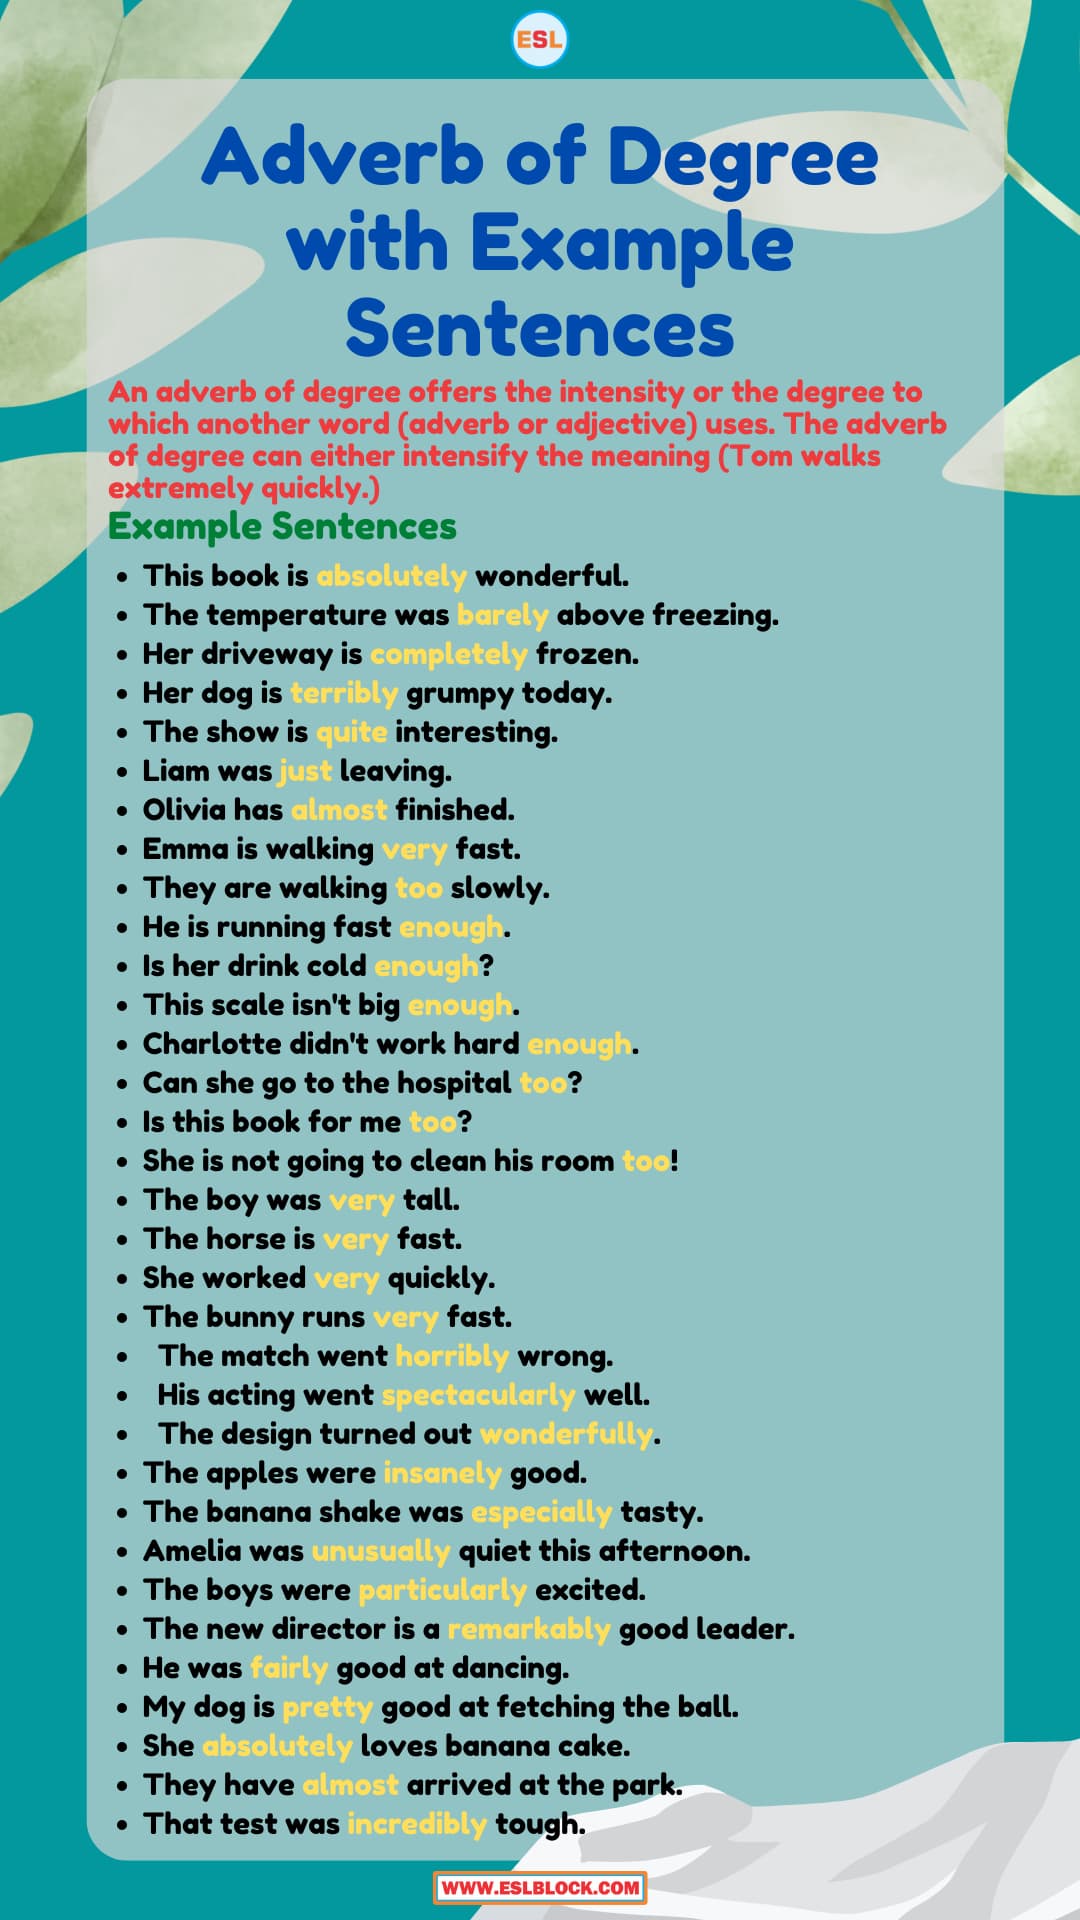 100 Example Sentences Using Adverb of Degree, Adverb of Degree, Adverb of Degree Rules with Example Sentences, Adverb of Degree with Example Sentences, Rules of Using Adverb of Degree, Rules of Using Adverb of Degree with examples, Rules of Using Adverbs with Example Sentences, Types of Adverbs, Types of Adverbs with Example Sentences, What are Adverbs, What are the types of Adverbs